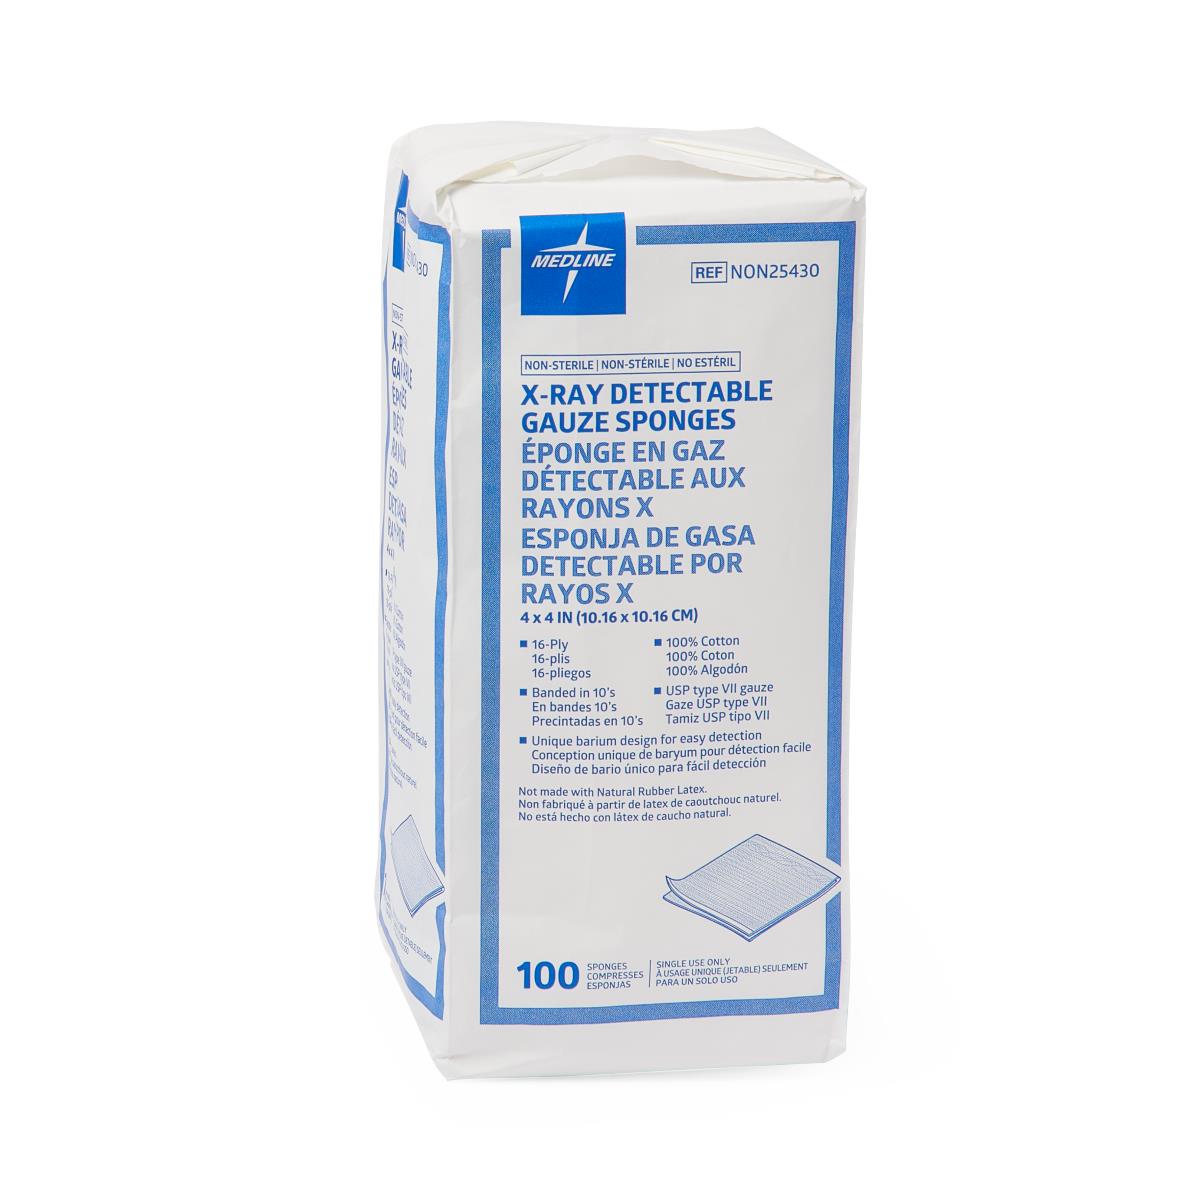 Nonsterile X-Ray Detectable Gauze Sponges Case of 2000